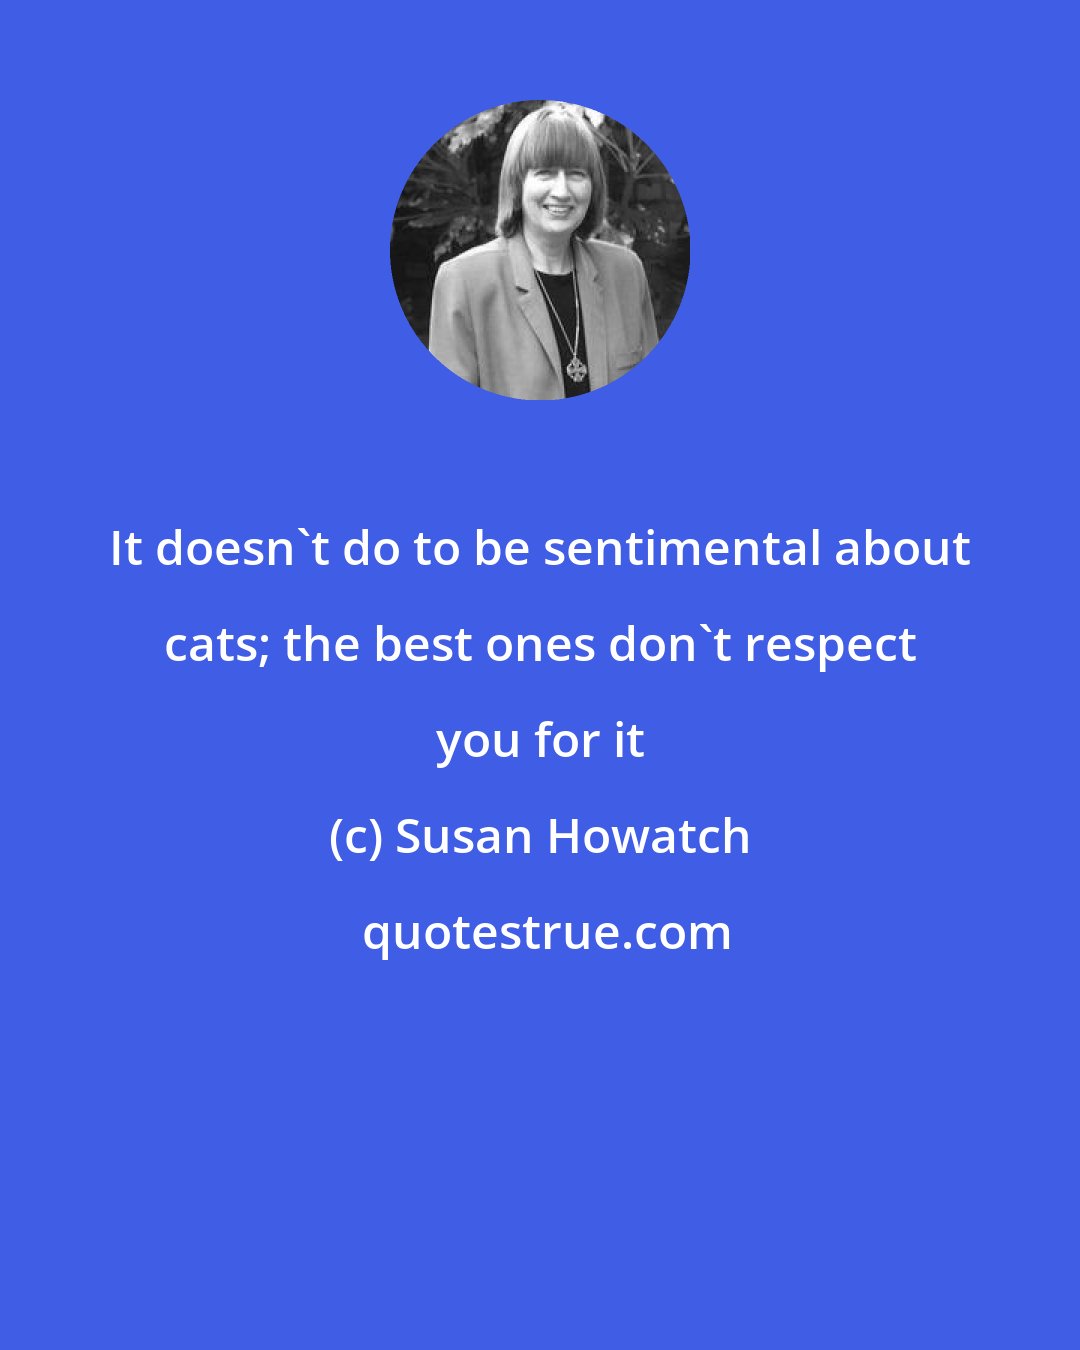 Susan Howatch: It doesn't do to be sentimental about cats; the best ones don't respect you for it